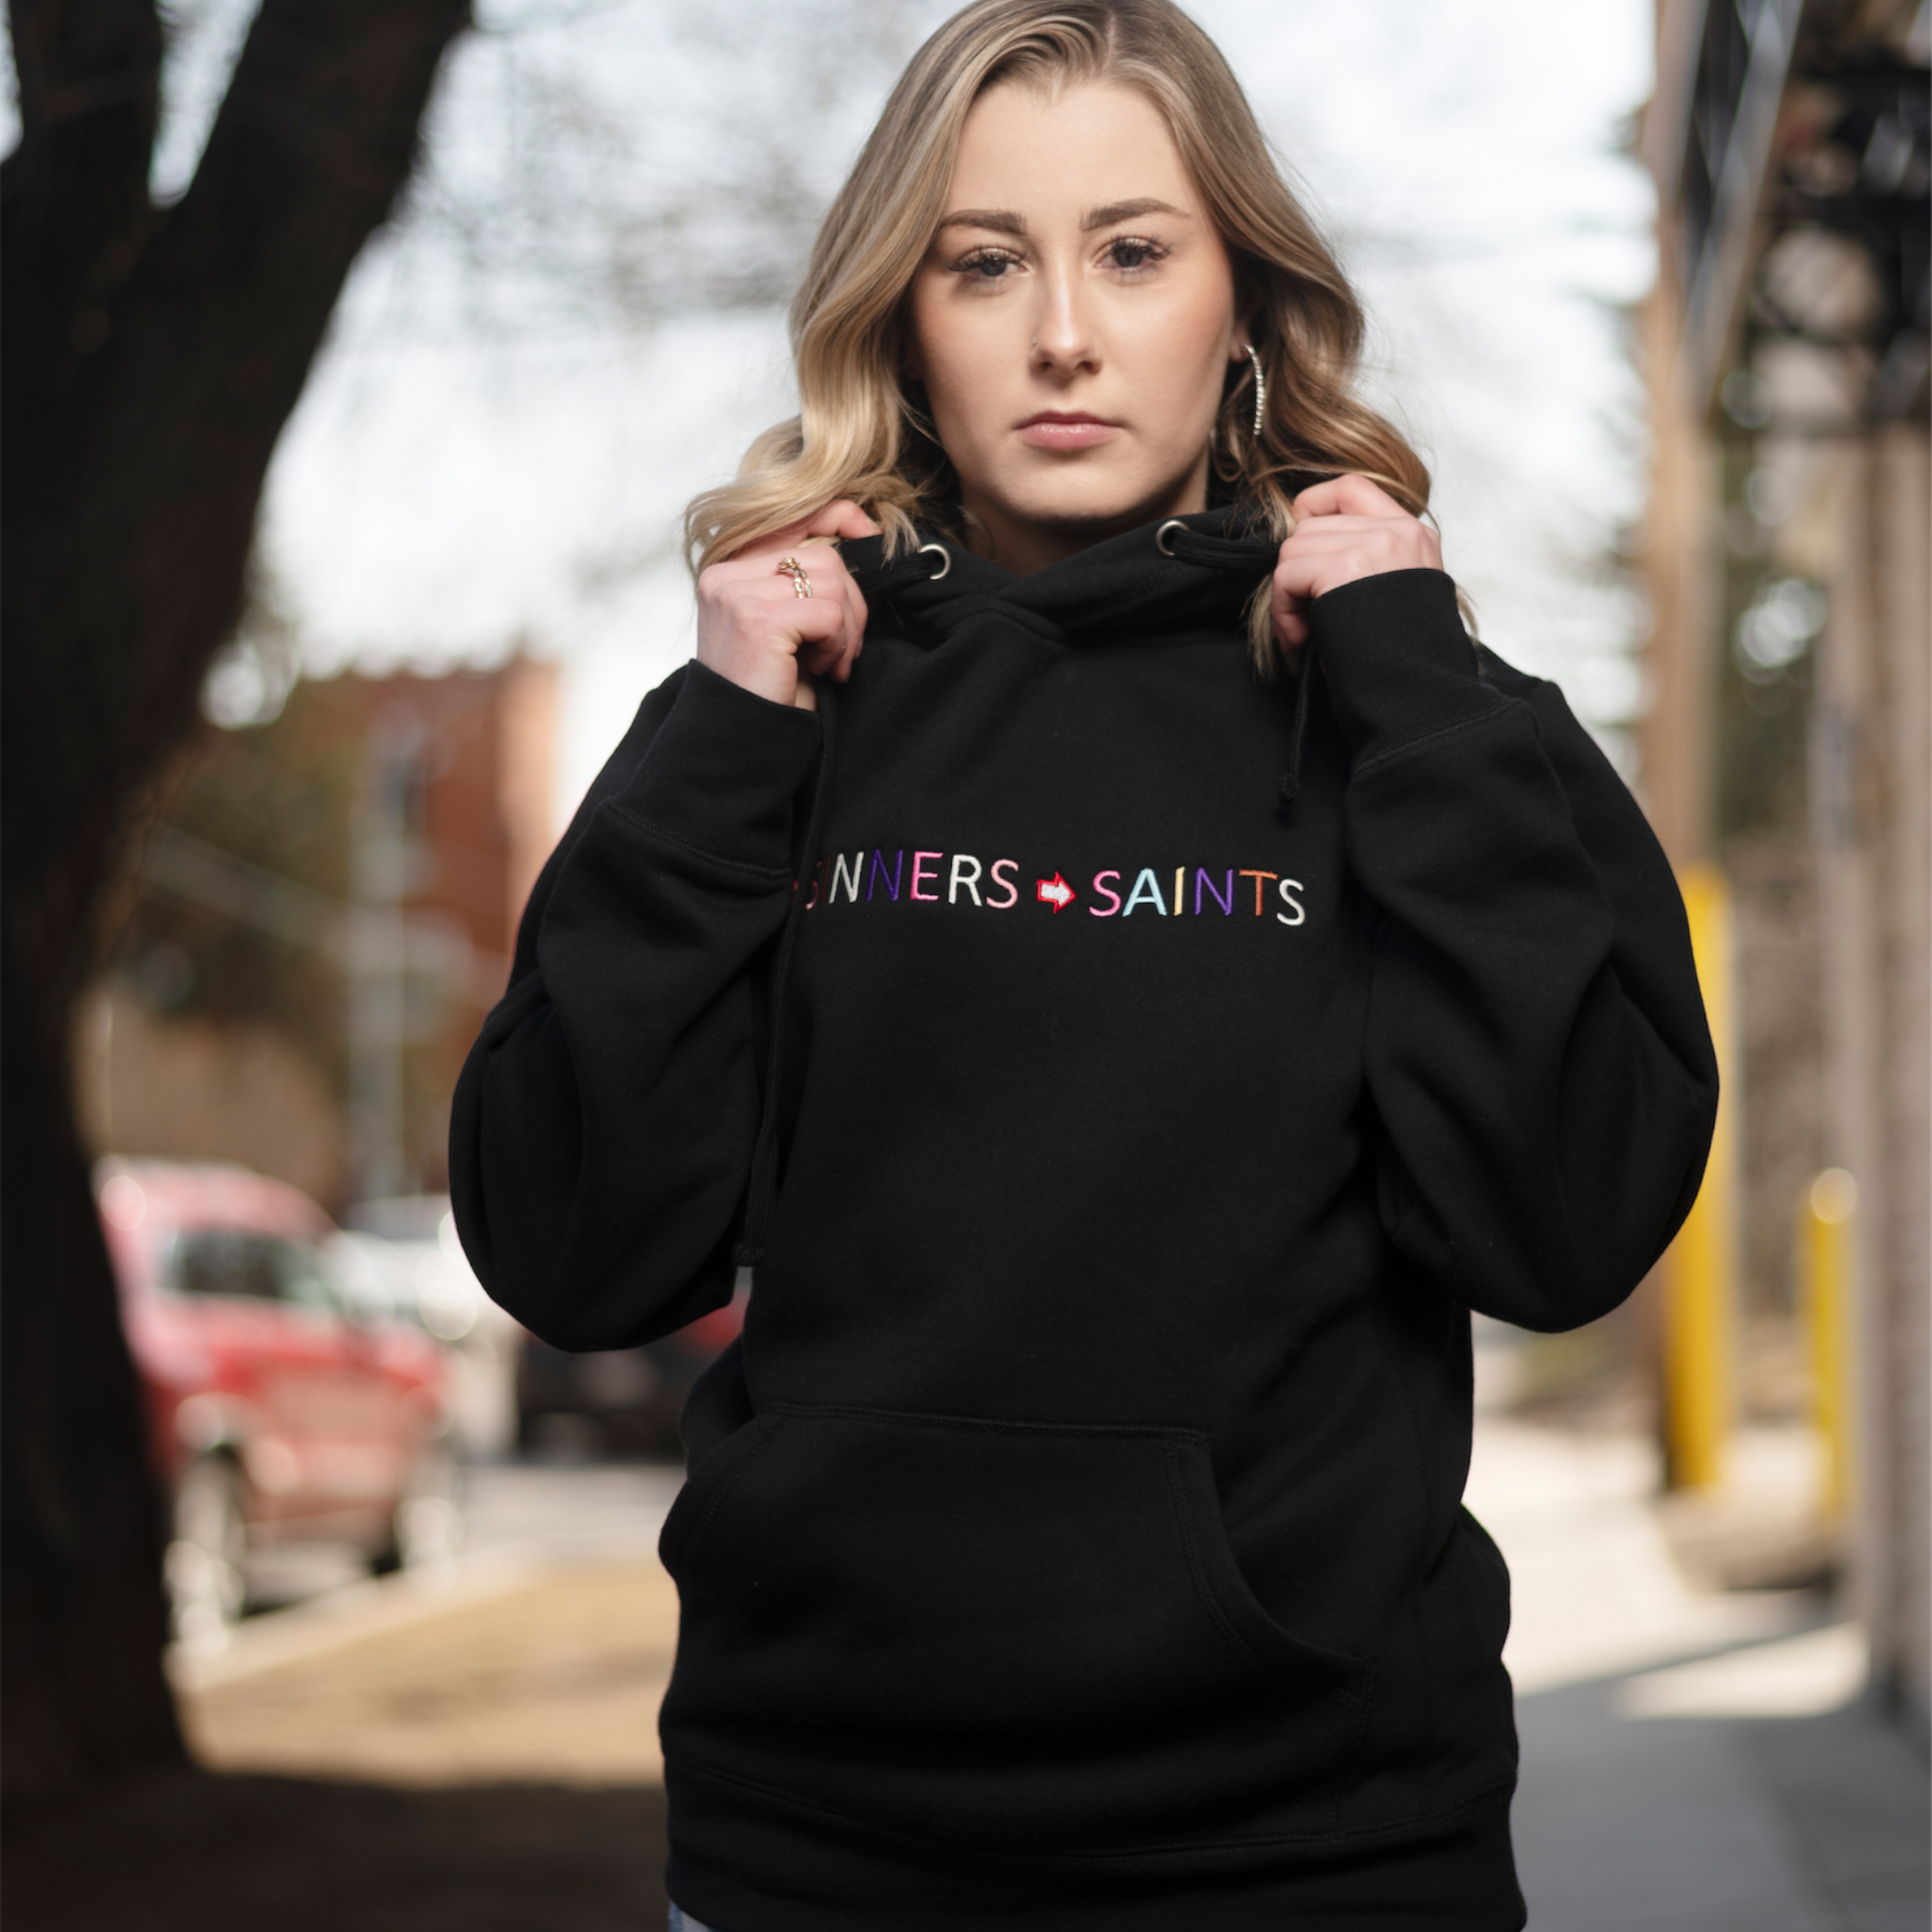 Direction Matters - Sinners to Saints Embroidered Hoodie (Colors Black, Brown) - TheSinners2Saints